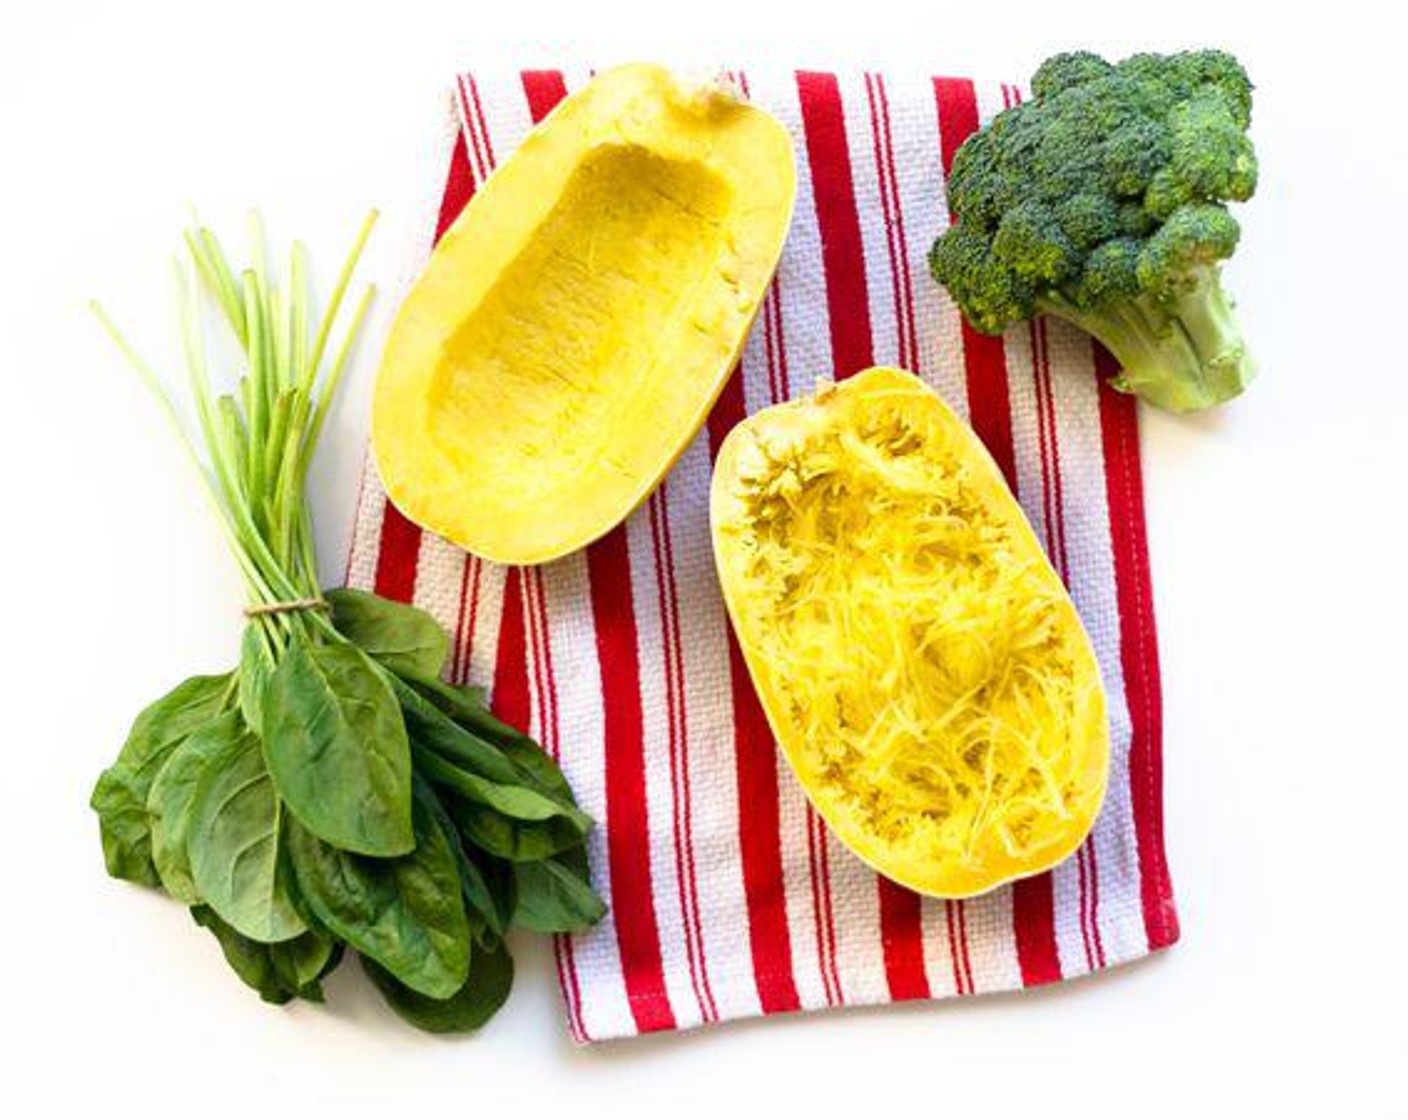 step 1 Cut Spaghetti Squash (1) in half lengthwise and scoop out seeds and gunk around seeds. Brush with Olive Oil (1 Tbsp) and place face down on a baking sheet.